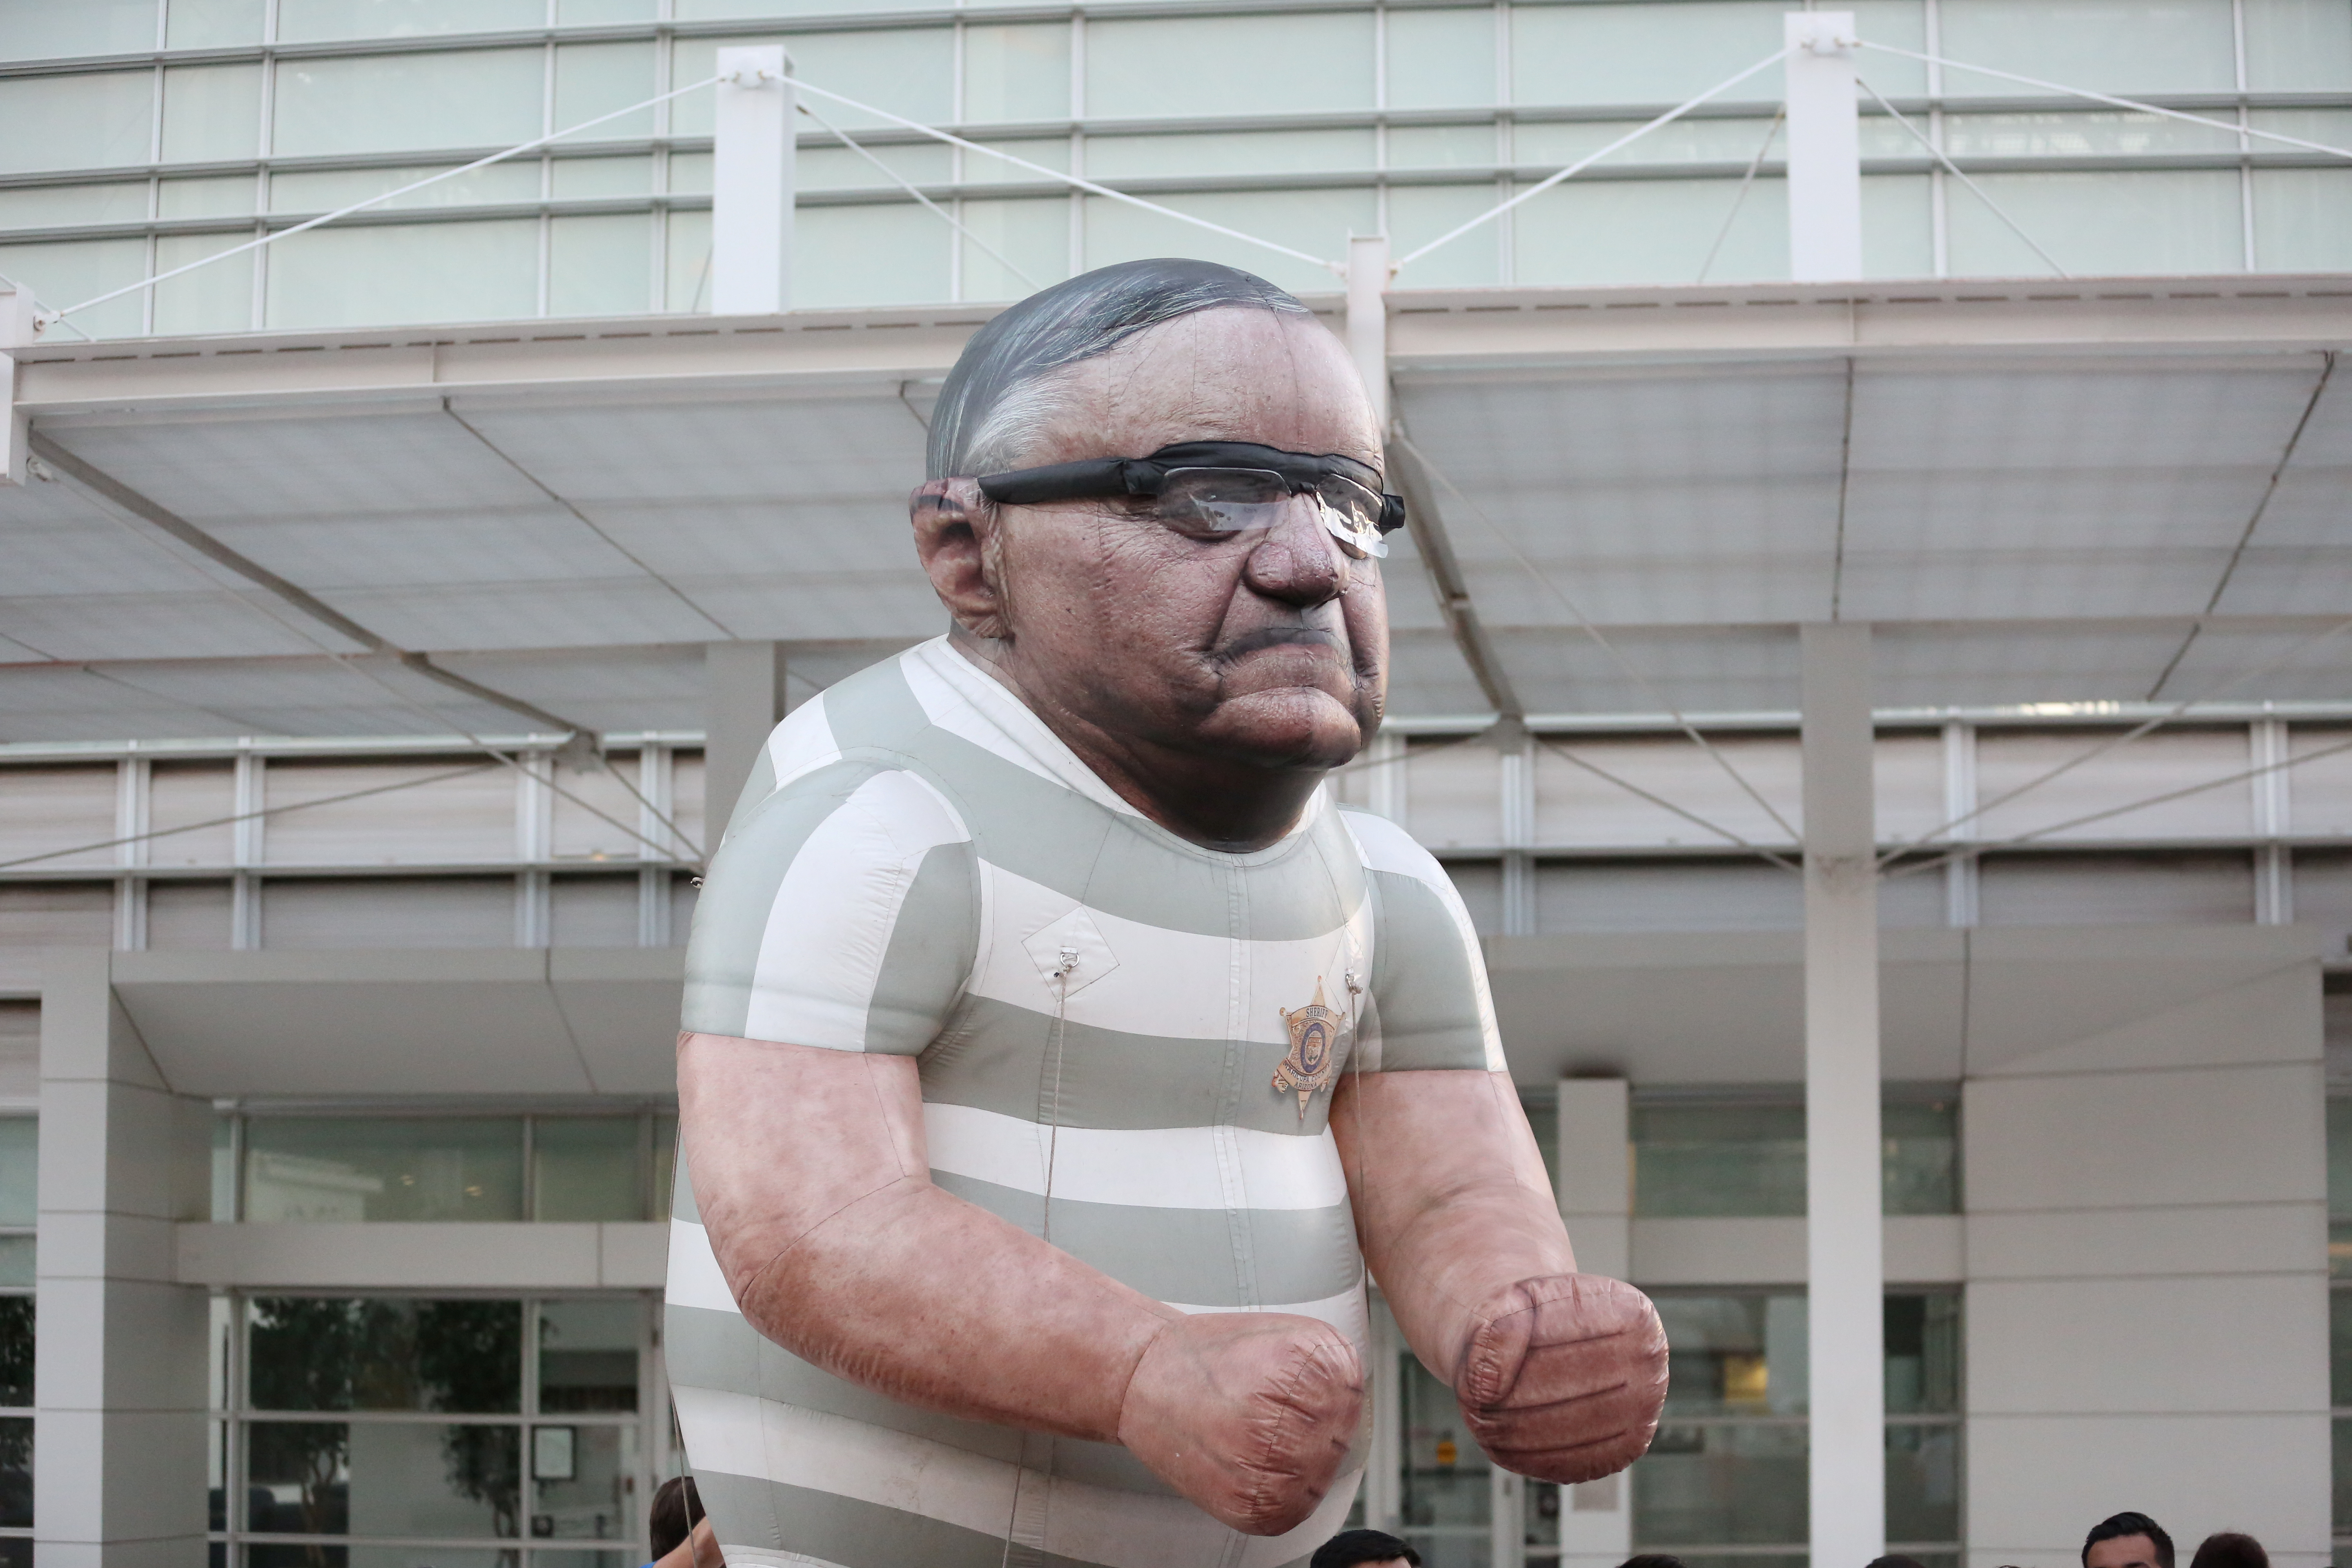 A protest balloon made to look former Sheriff Joe Arpaio.